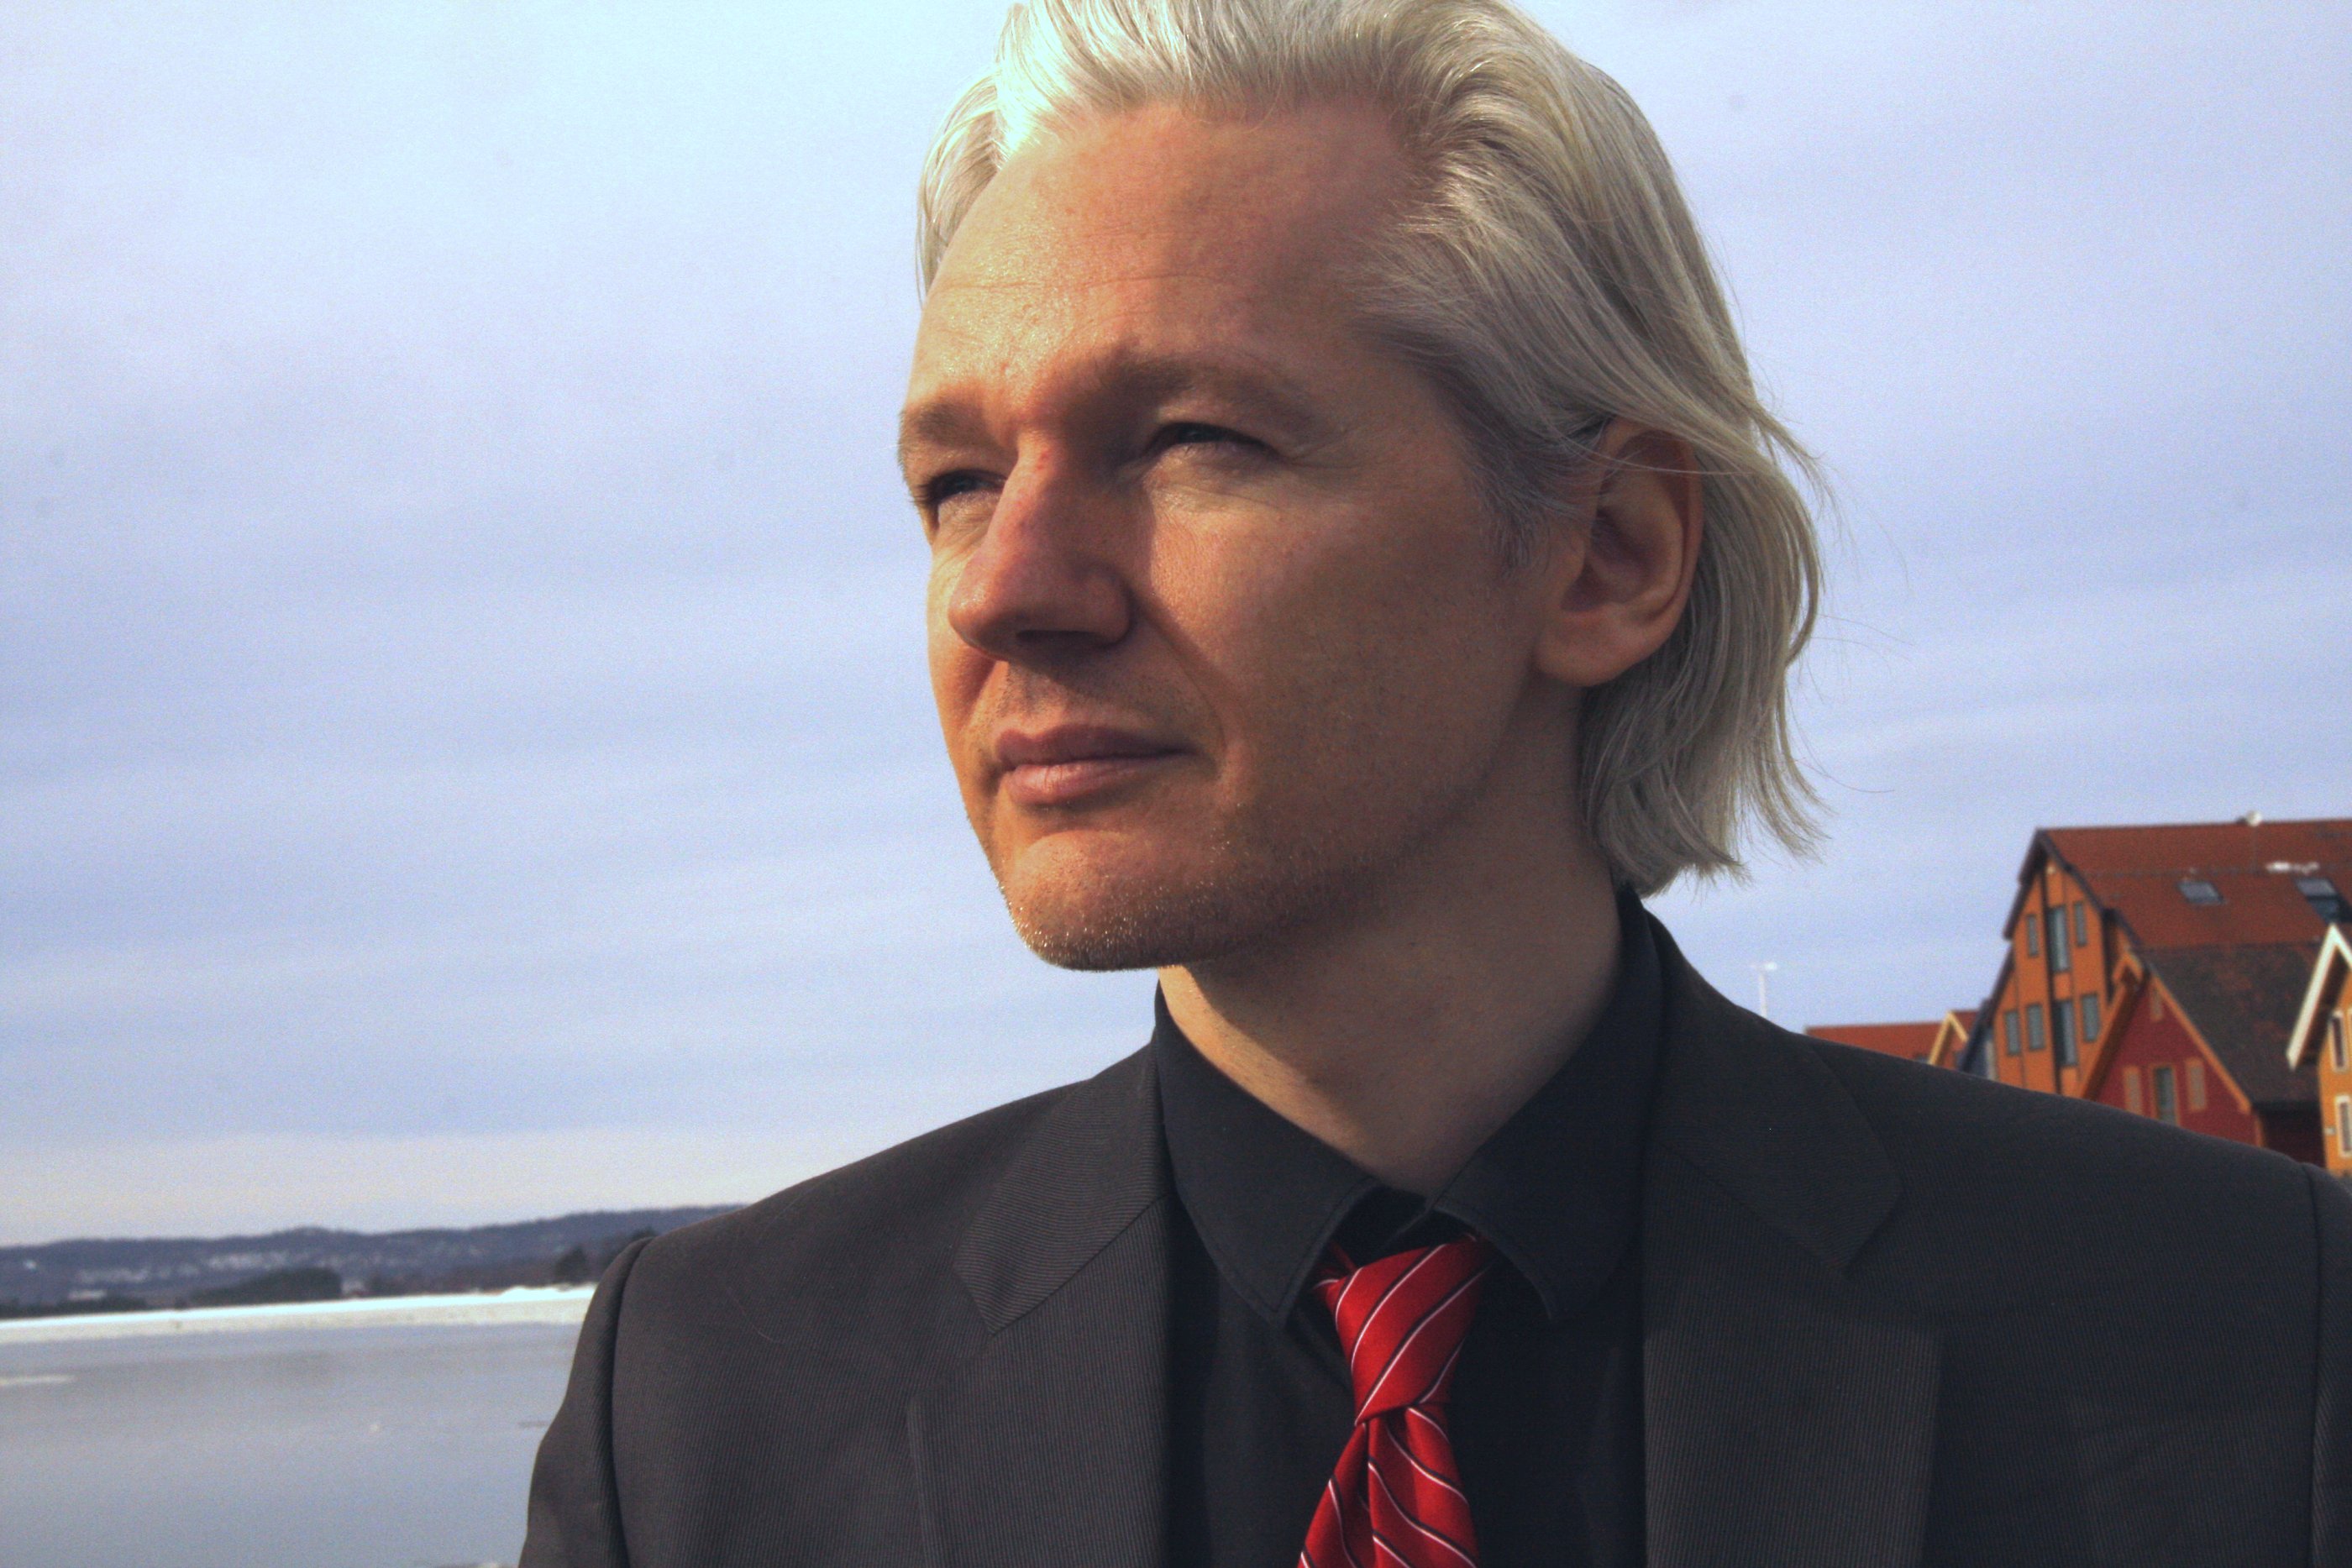 Image: British judge OK’s extradition of WikiLeaks founder Julian Assange to U.S.; he should be FREED for exposing the globalist deep state